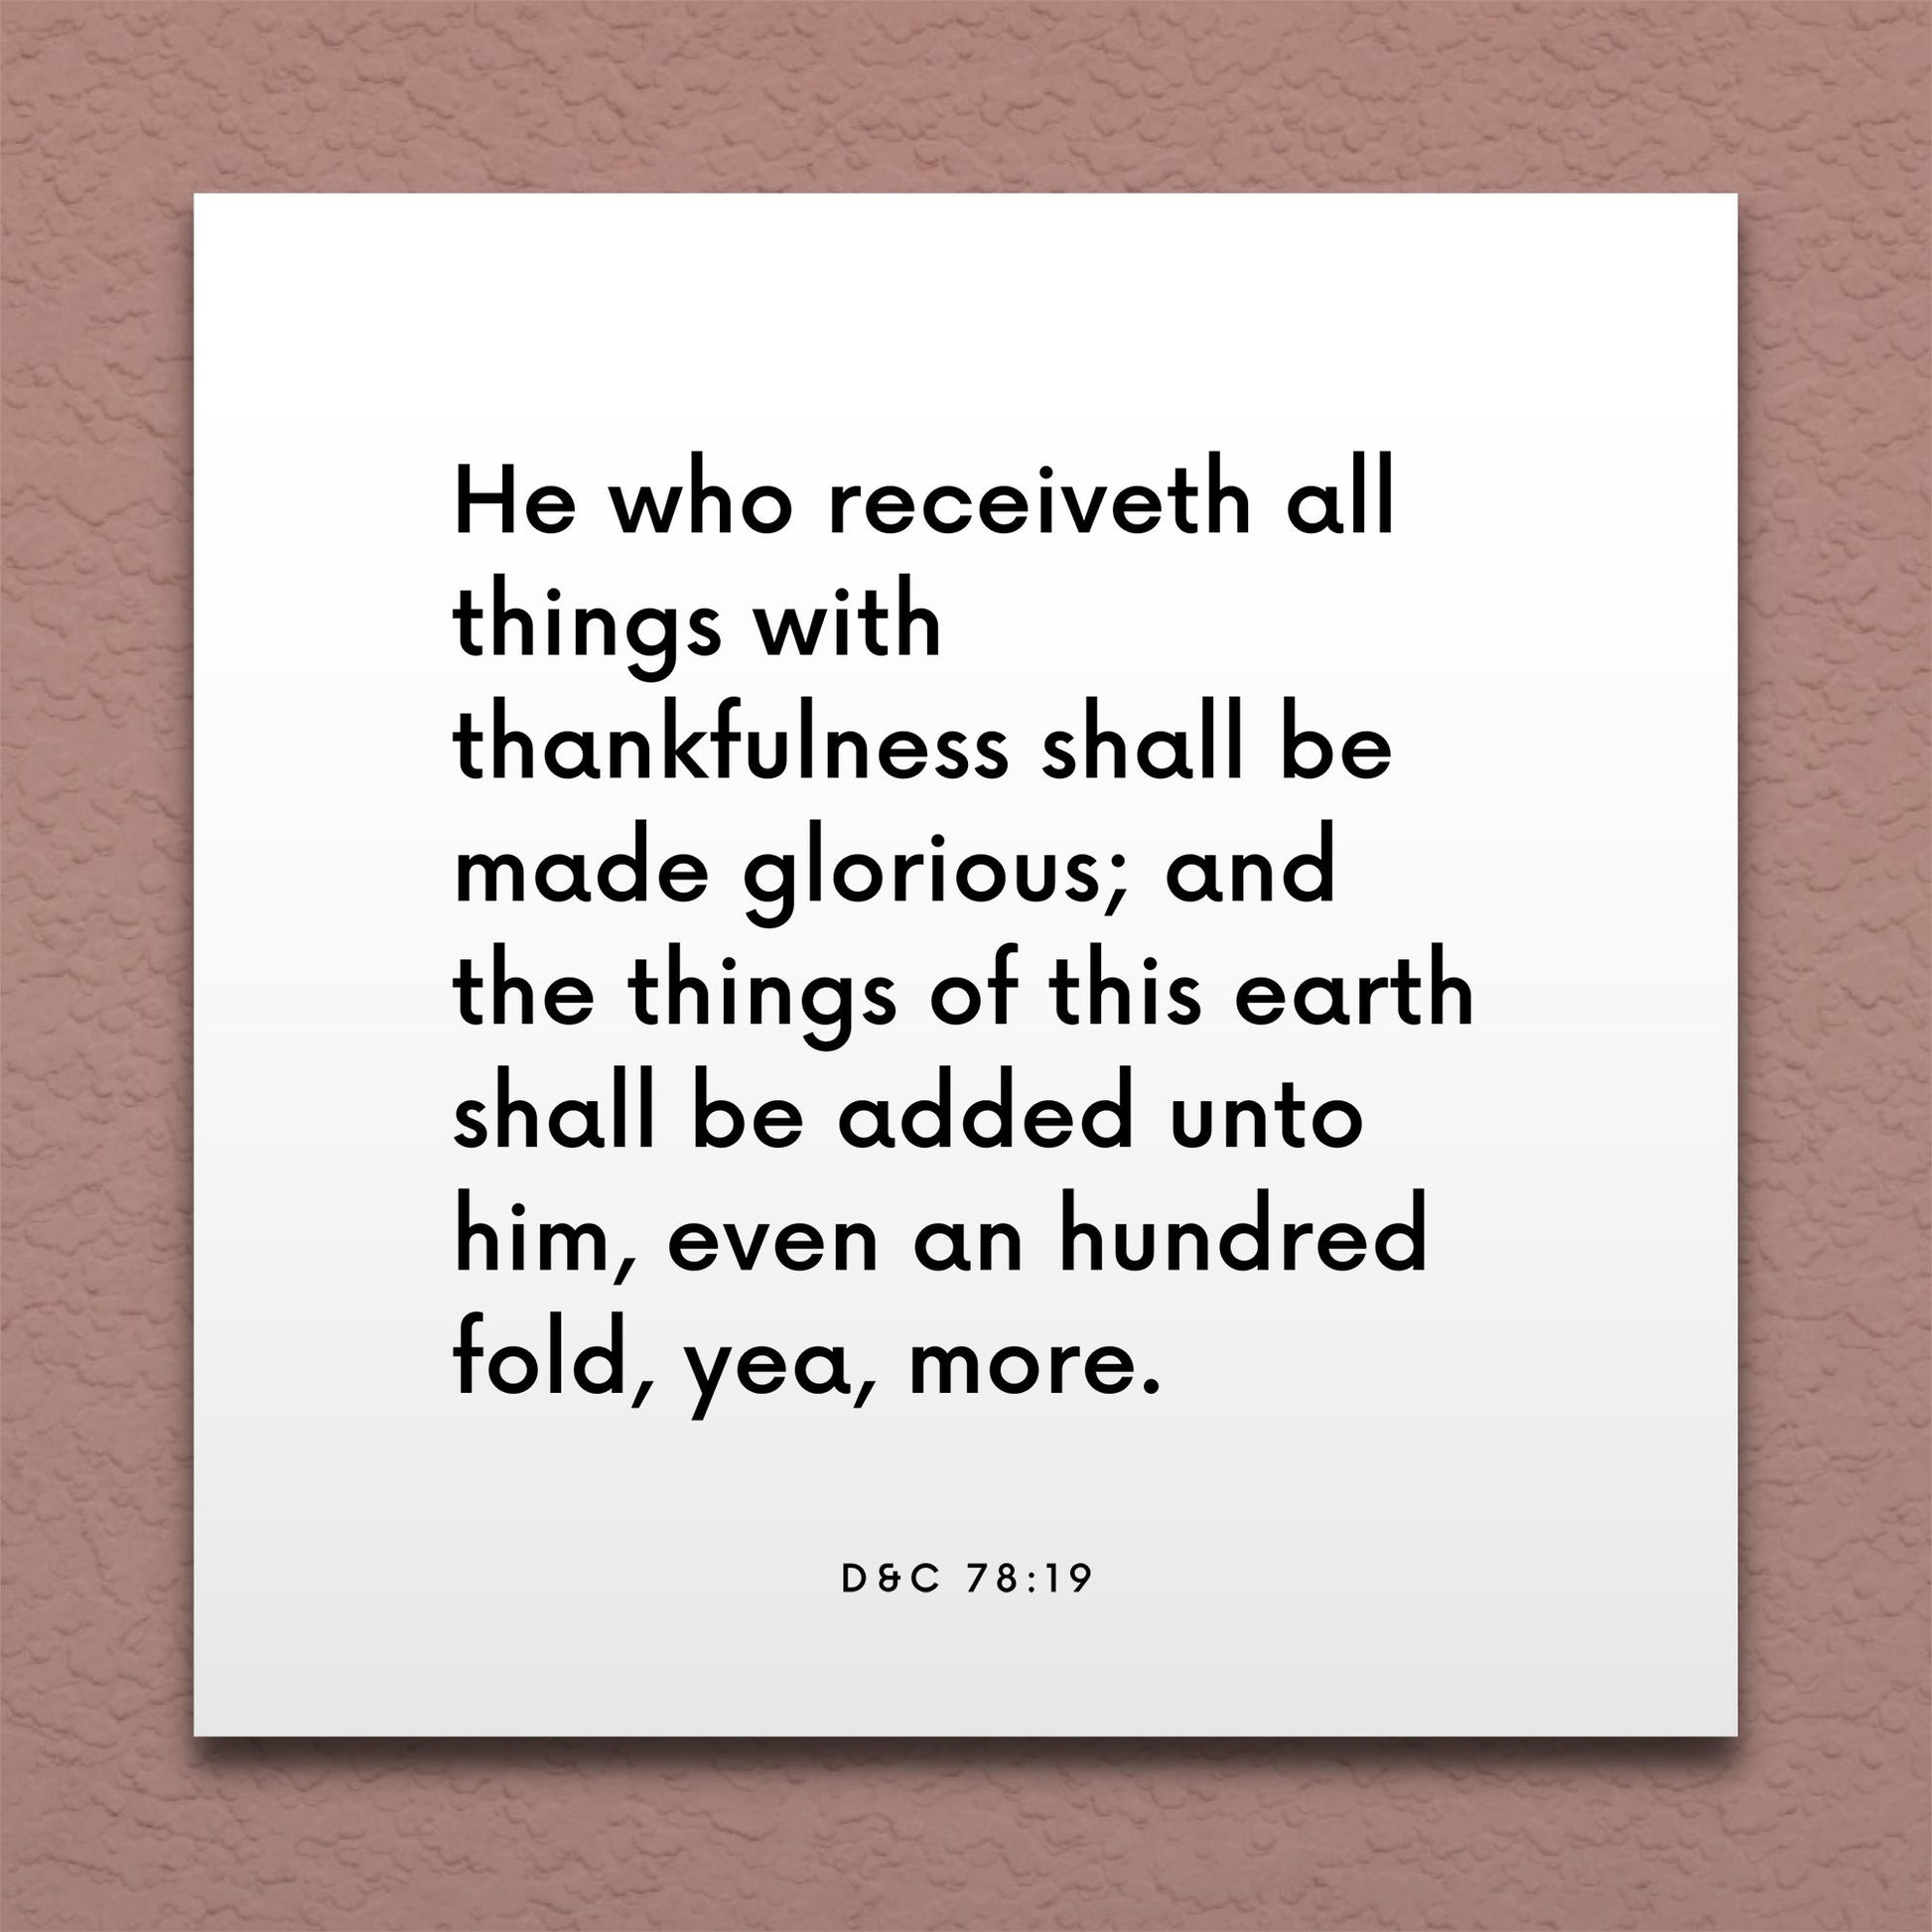 Wall-mounted scripture tile for D&C 78:19 - "He who receiveth all things with thankfulness"